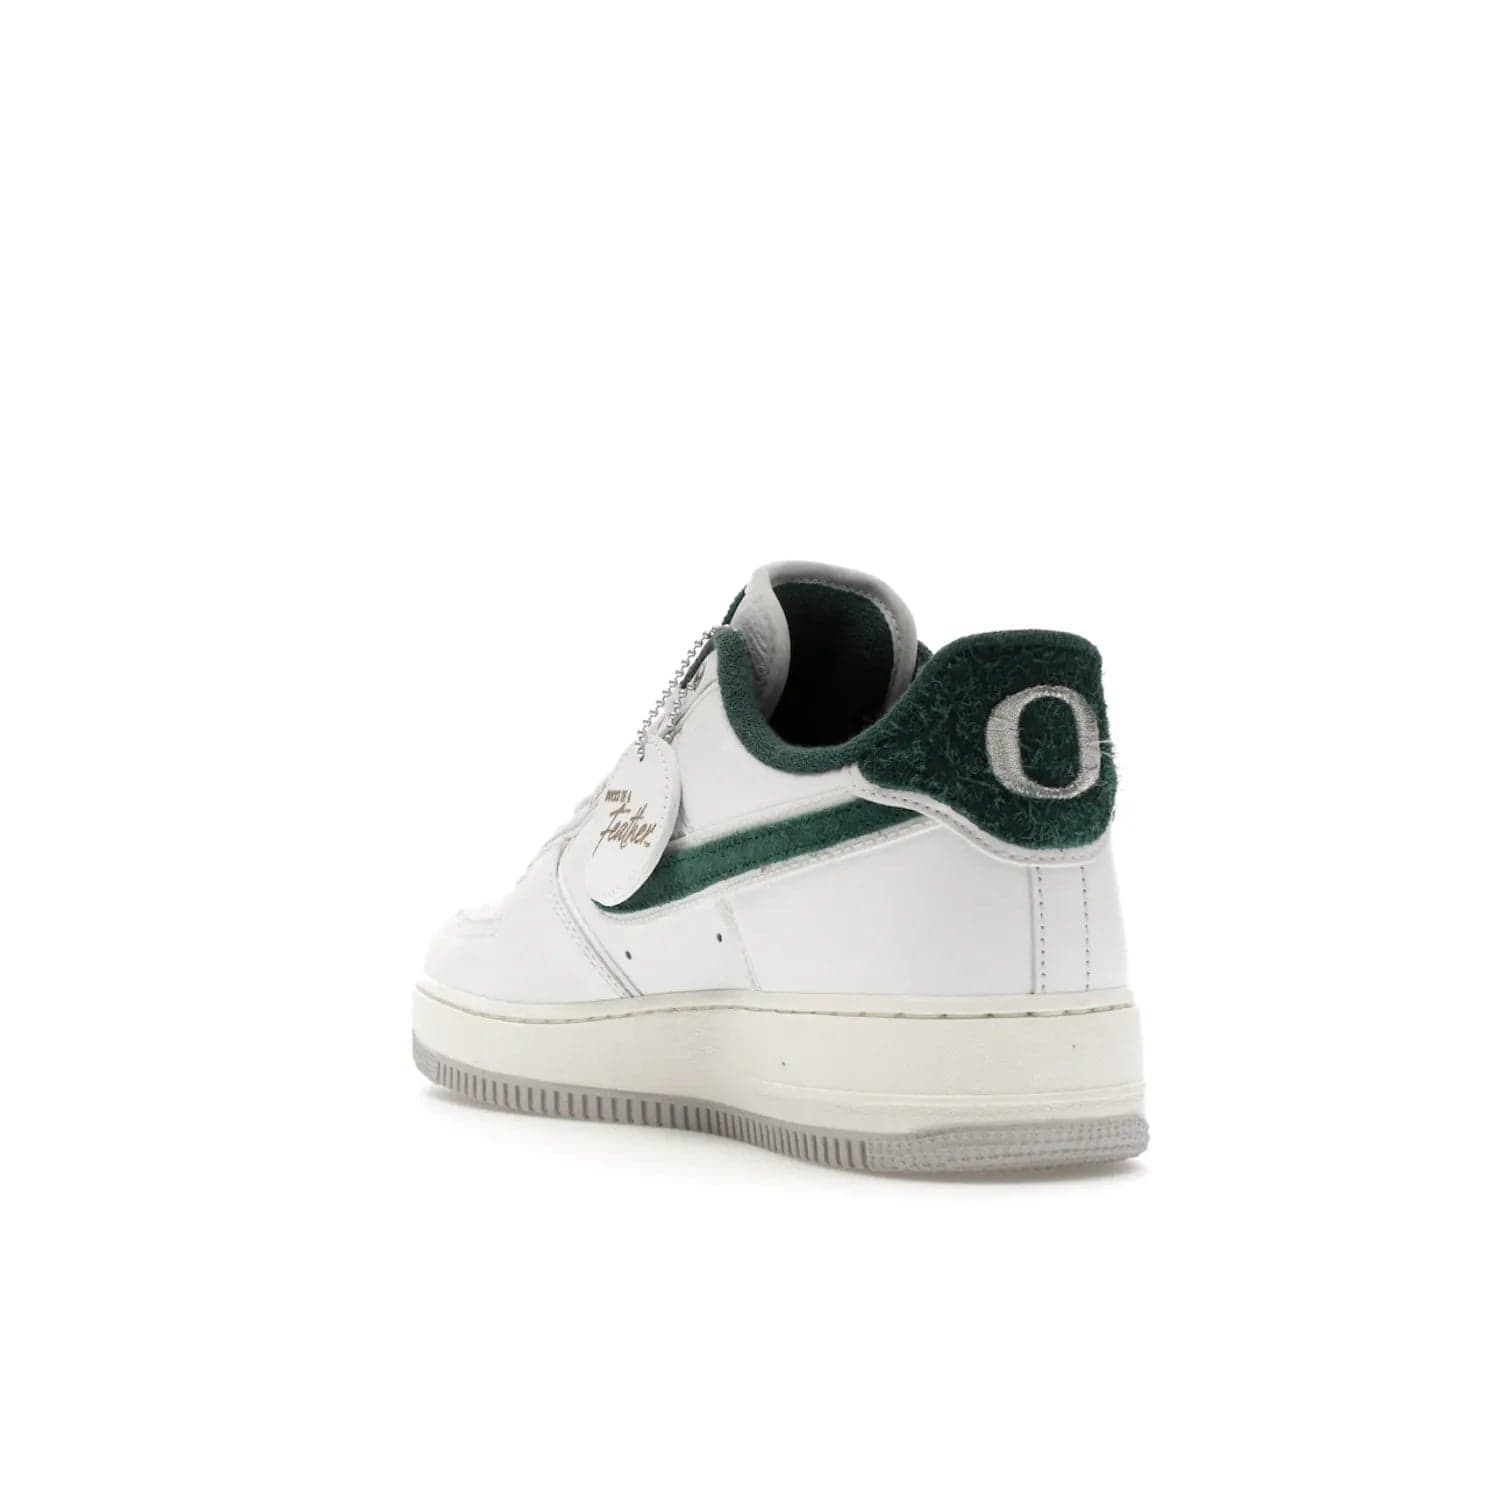 Nike Air Force 1 Low '07 Premium University of Oregon PE - Image 25 - Only at www.BallersClubKickz.com - The Nike Air Force 1 Low '07 Premium. Special Oregon University colorway. White base with green and sail accents. Cushioned rubber midsole. Comfort and style. Support your school!